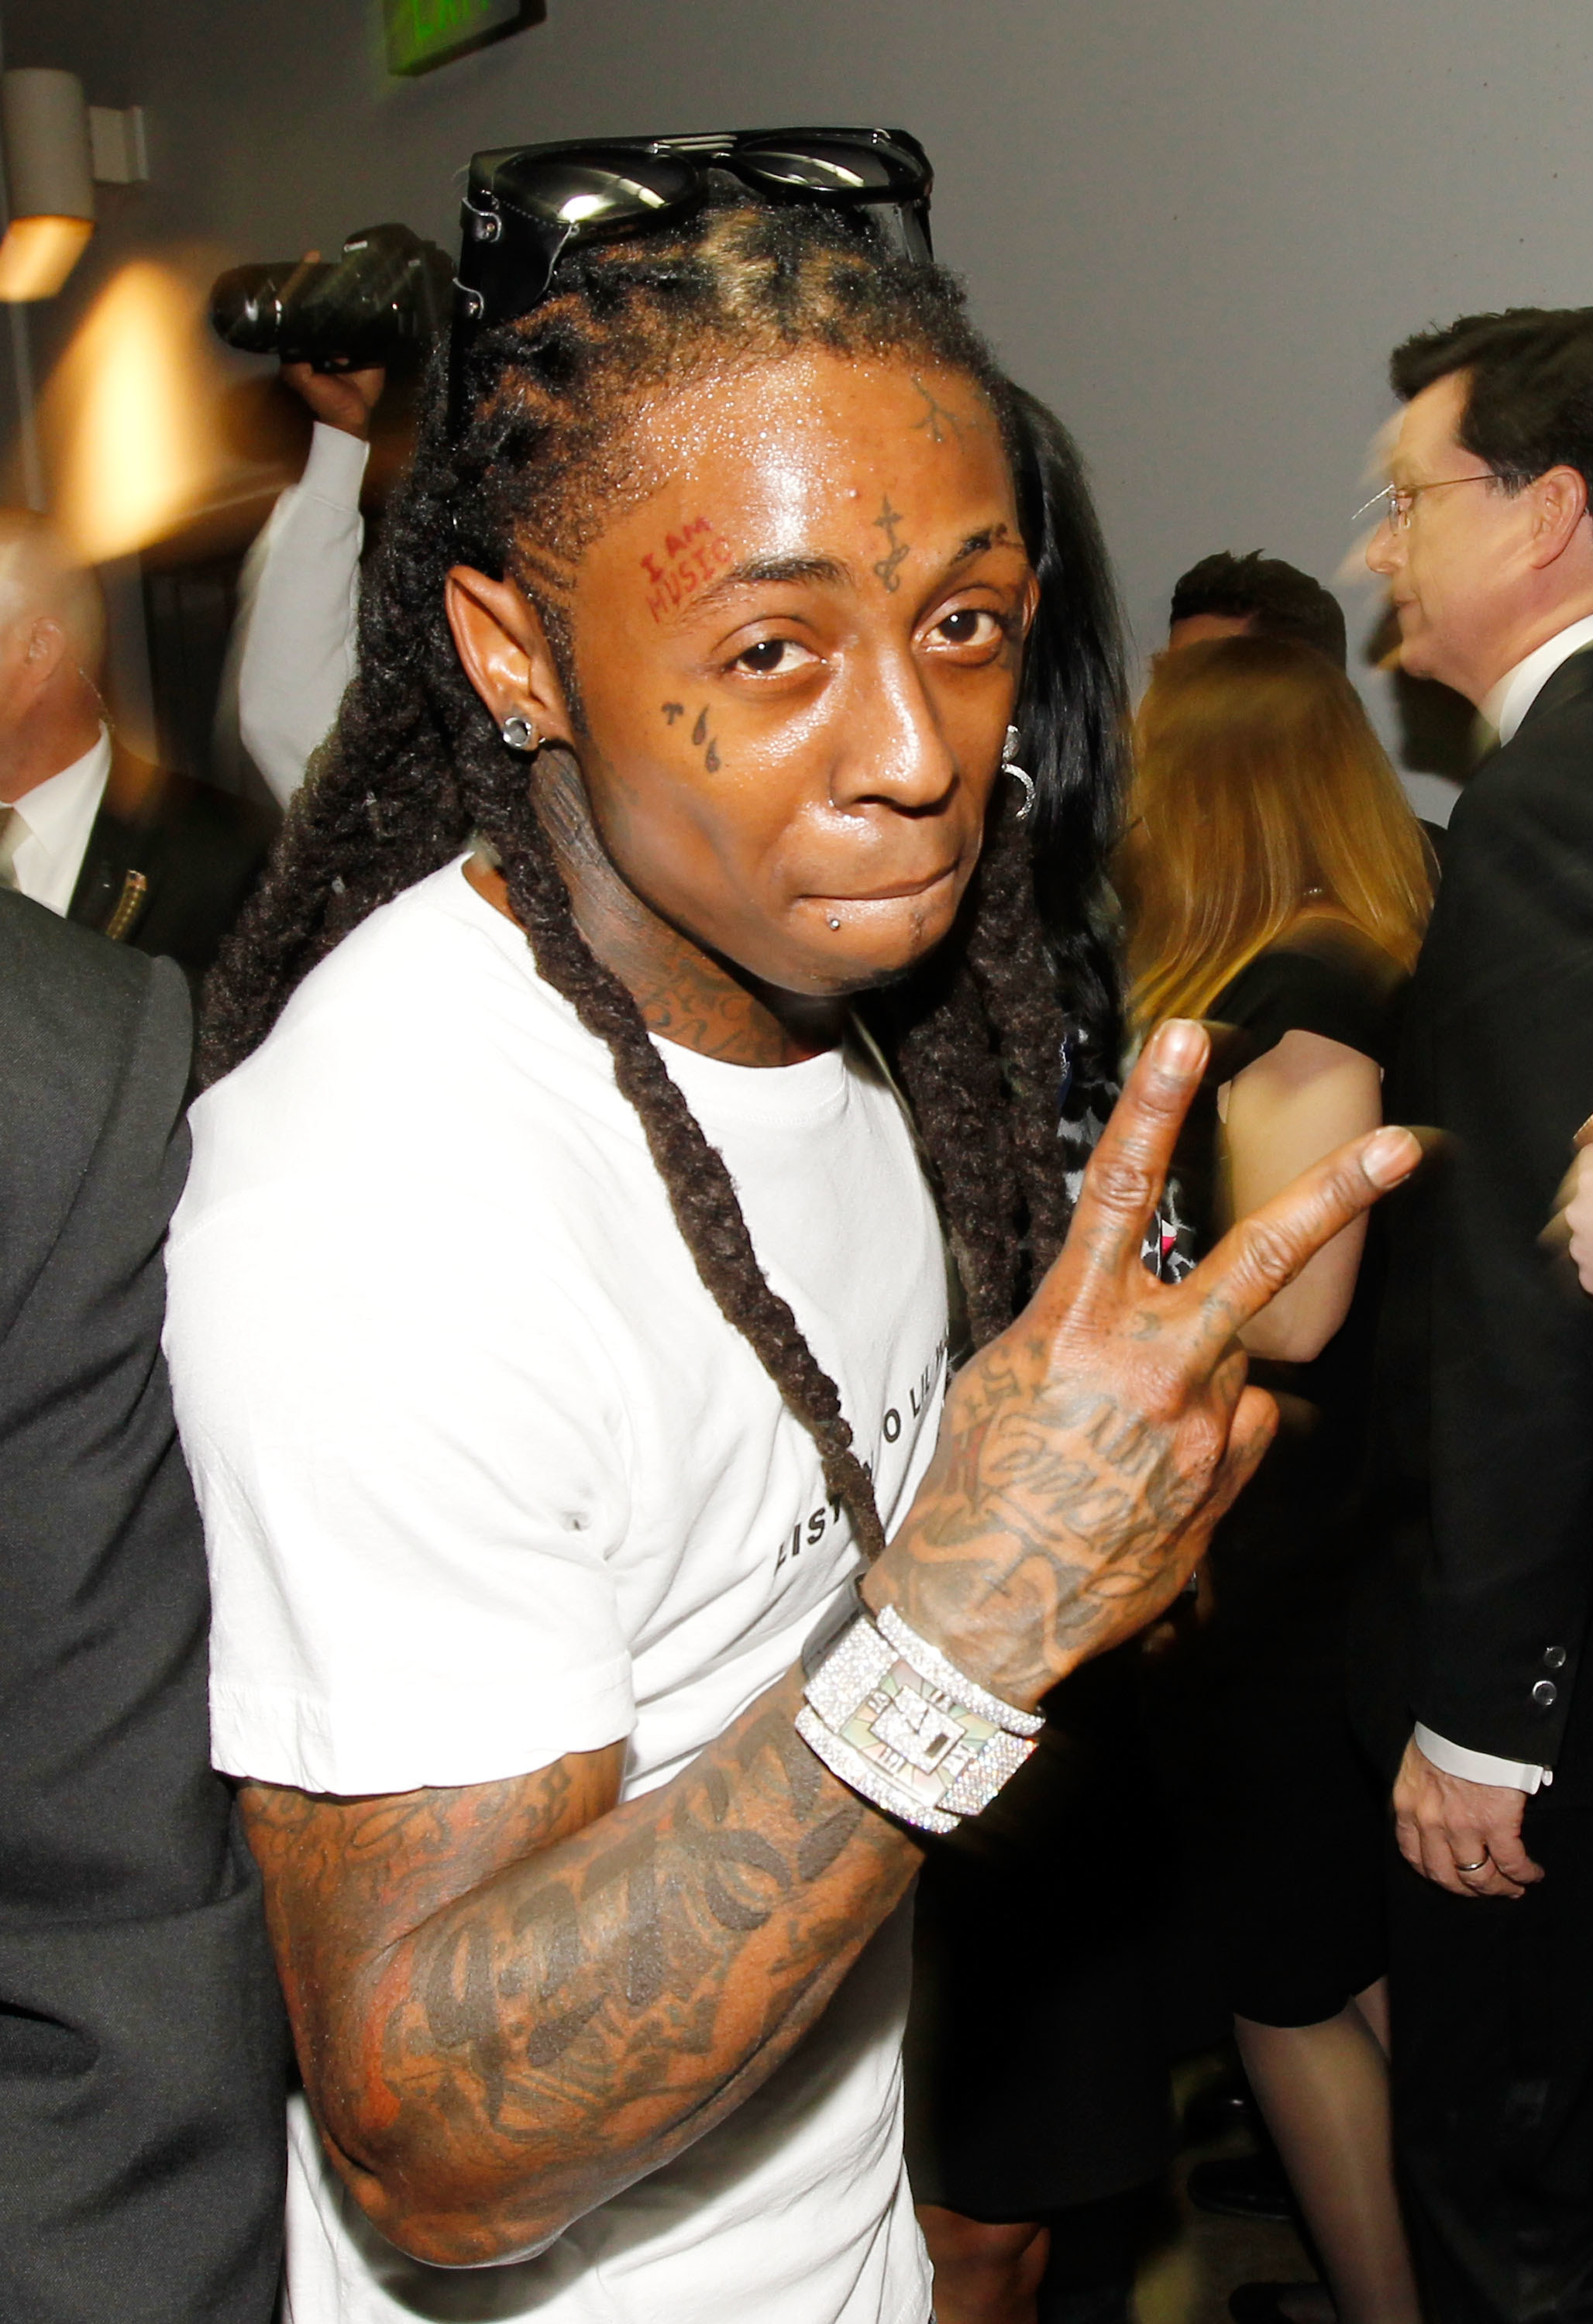 Lil Wayne backstage at the Grammys in 2010